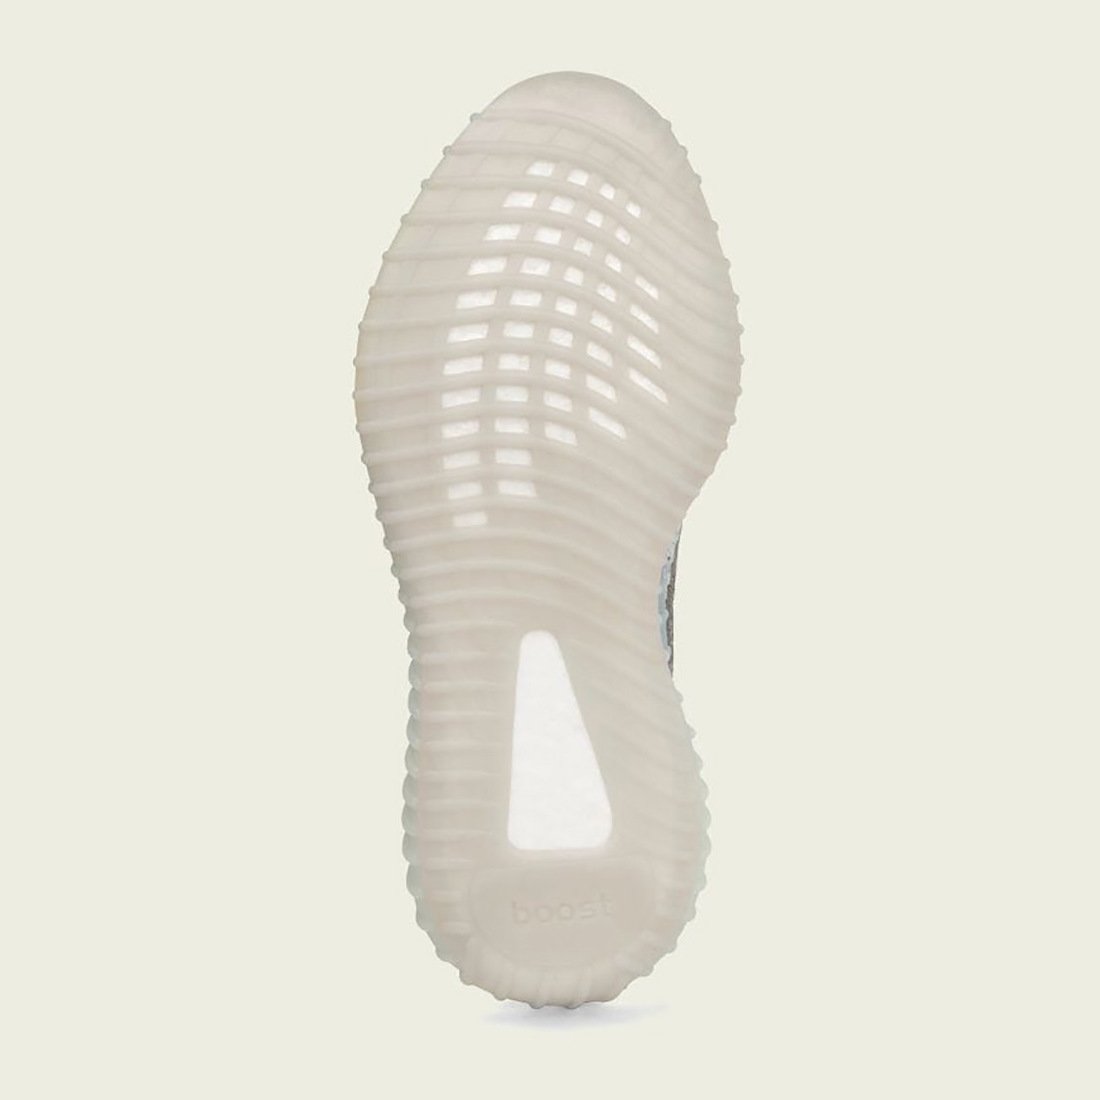 adidas yeezy boost 350 v2 blue tint restock 2021 release date info 2